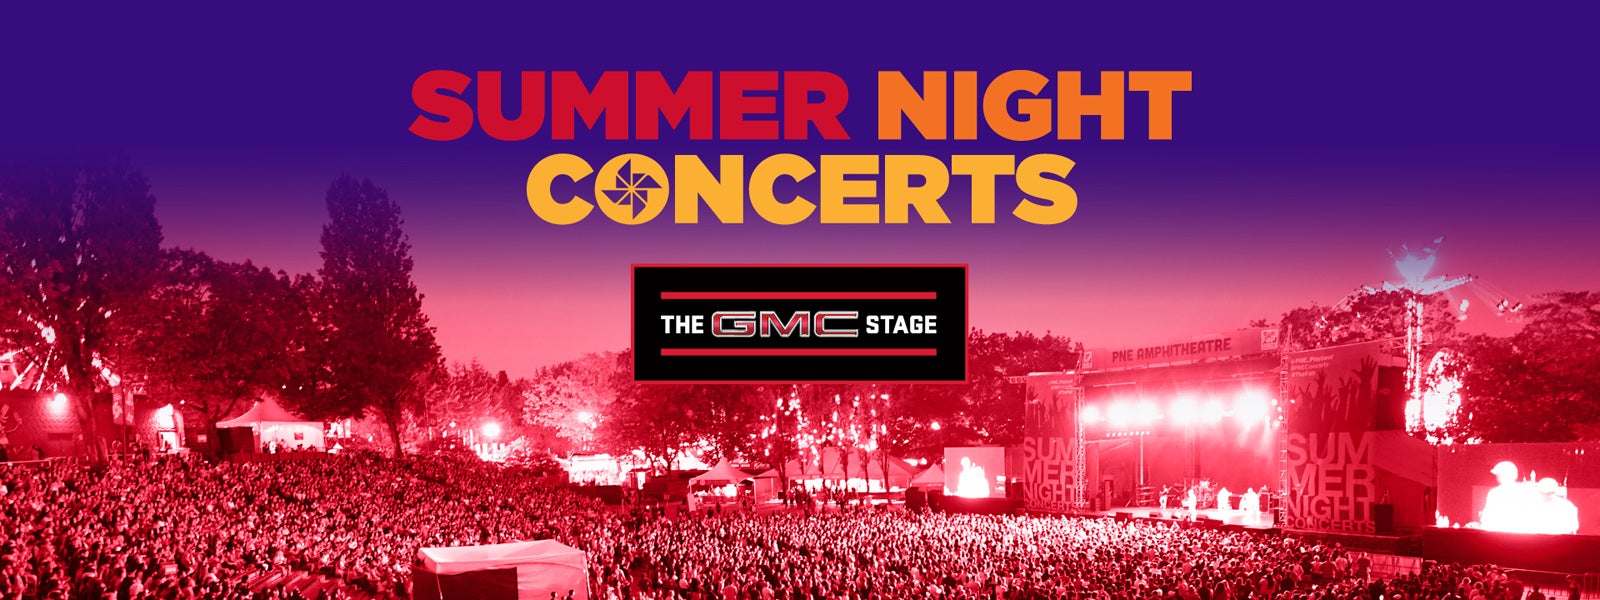 Summer Night Concerts 